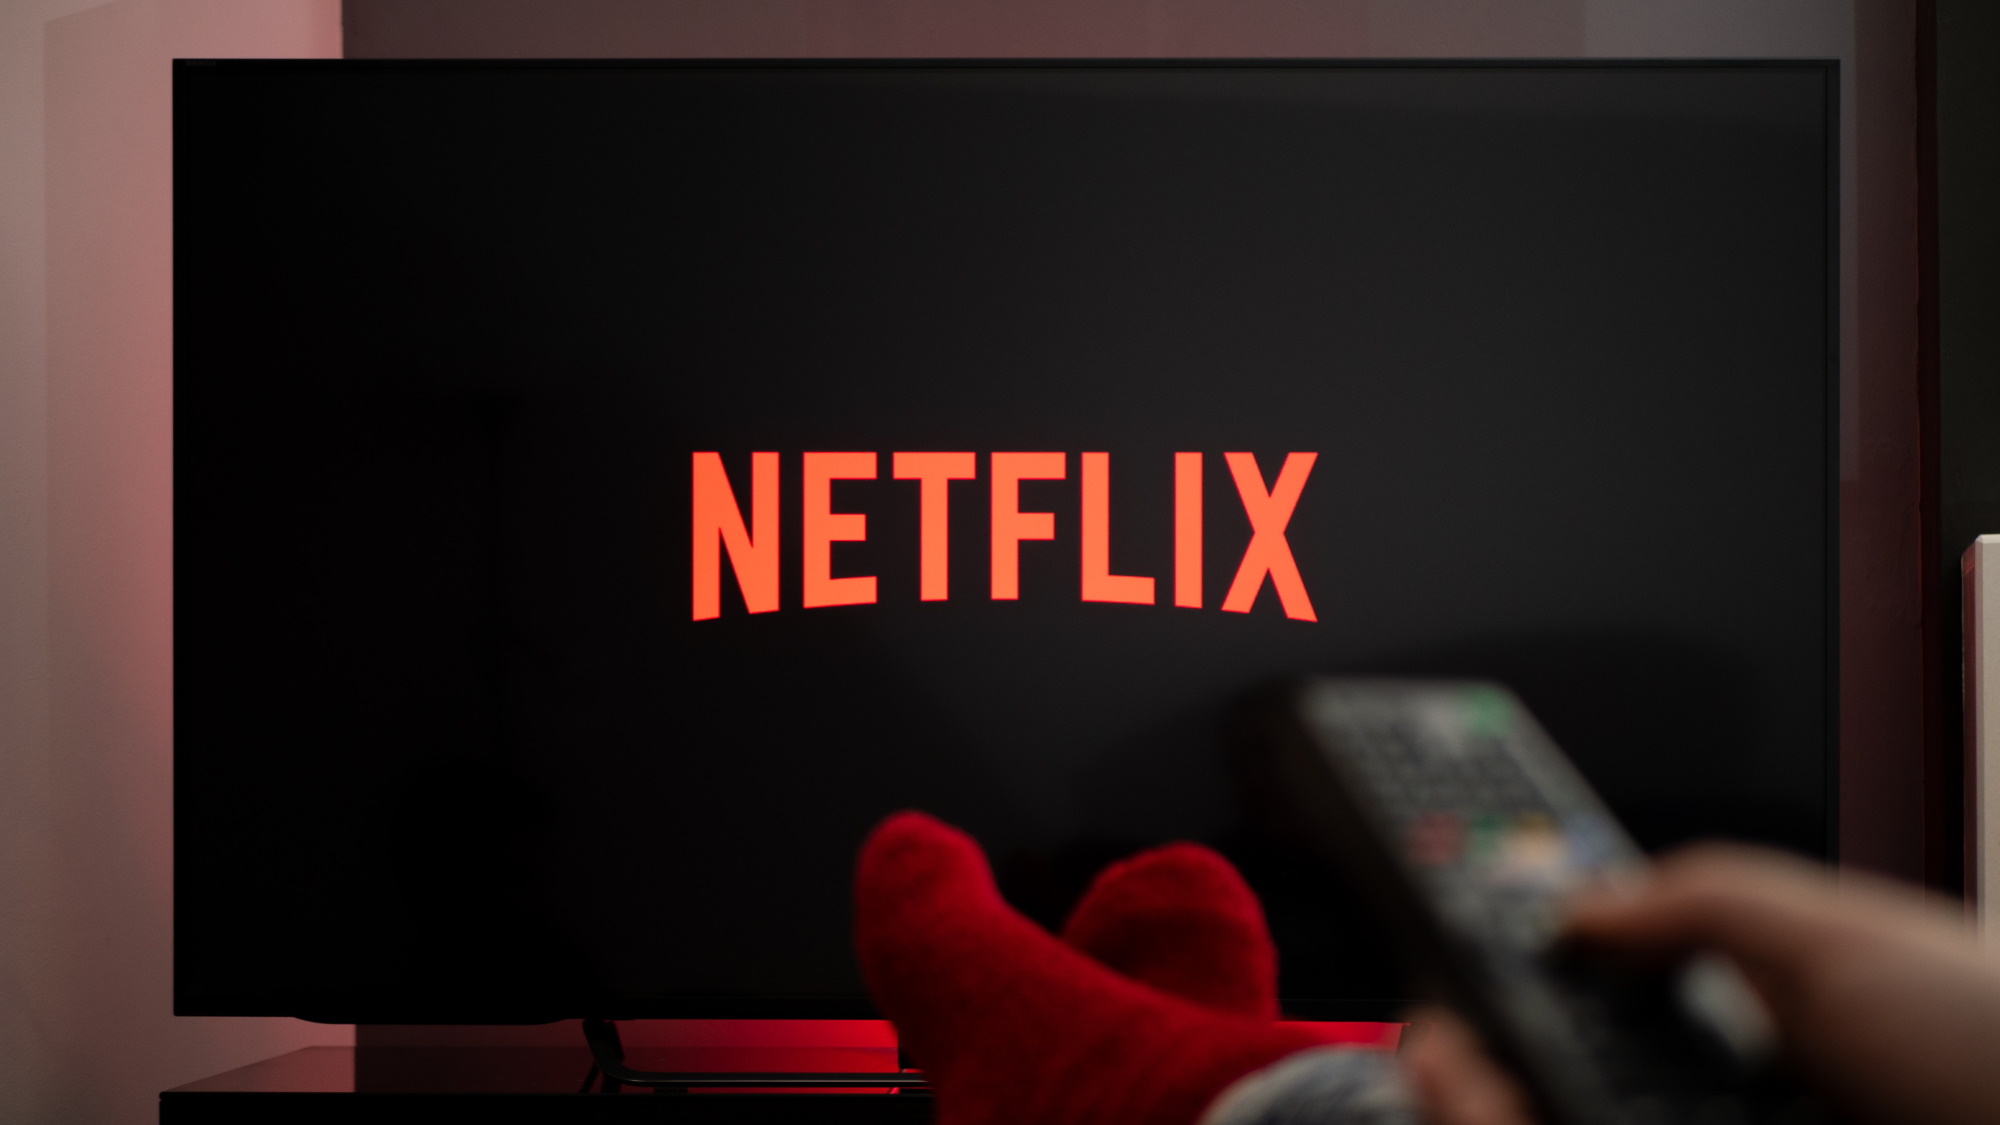 Netflix on TV screen with feet up in front and hand holding remote